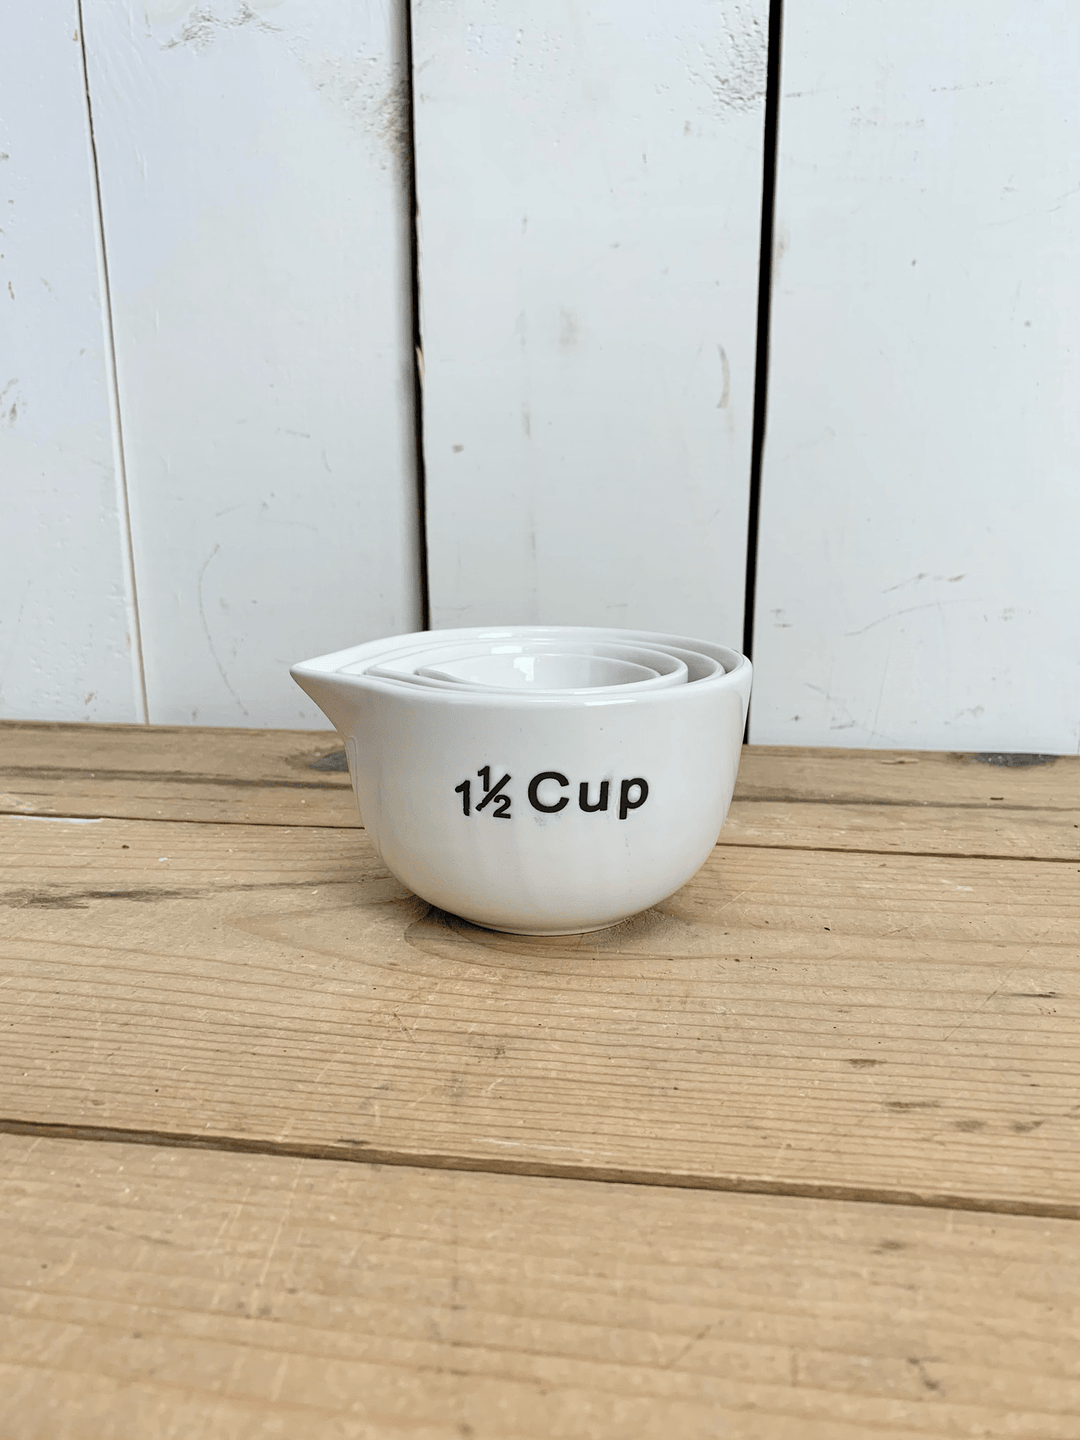 Measuring Cups - White Porcelain